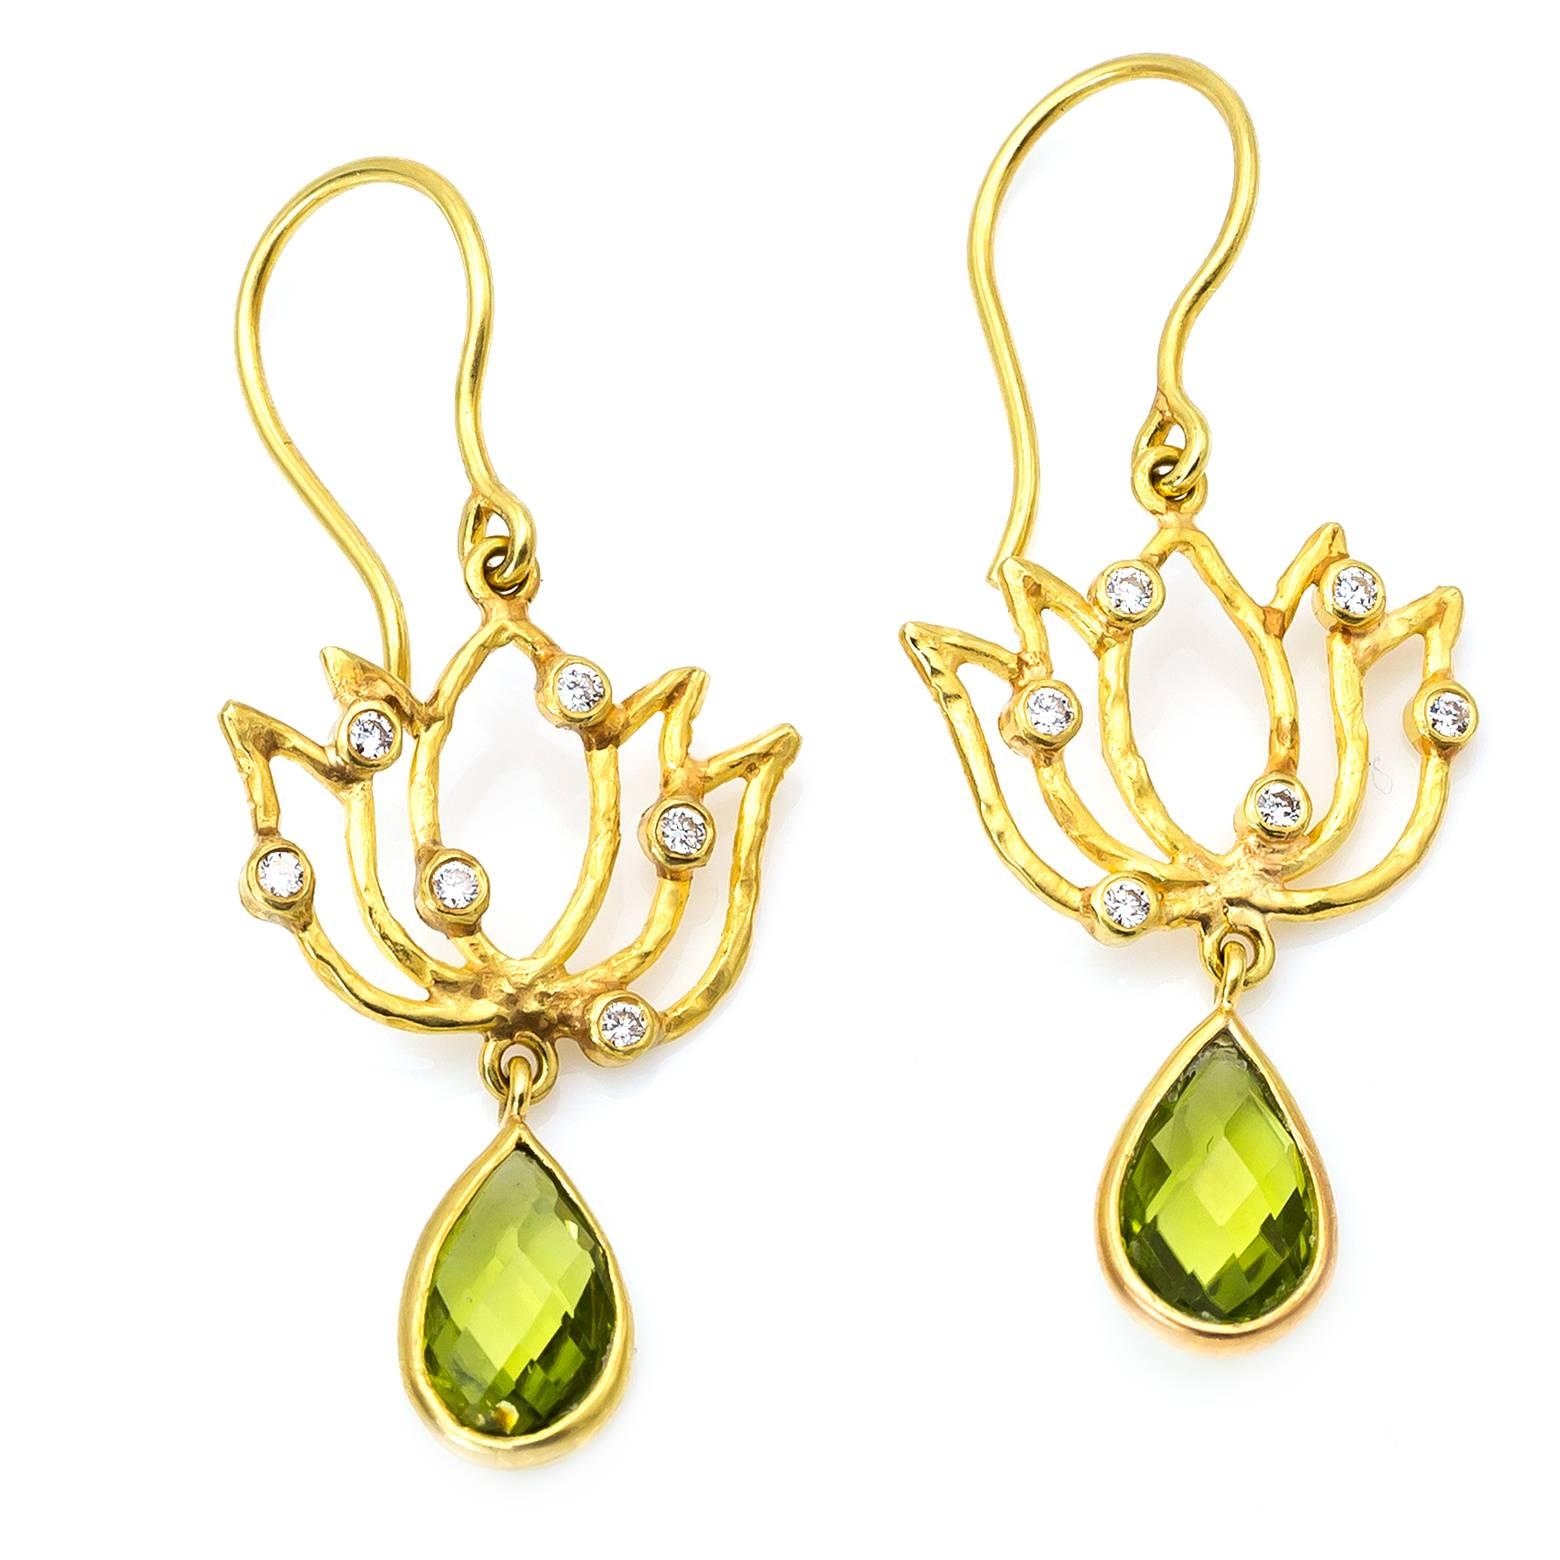 Stunning and elegant drop earrings adorned with pear shaped peridots that swing from the bottom and dazzle with 12 accent diamonds! These serene beauties invoke the blessed essence of gorgeous golden lotuses. 